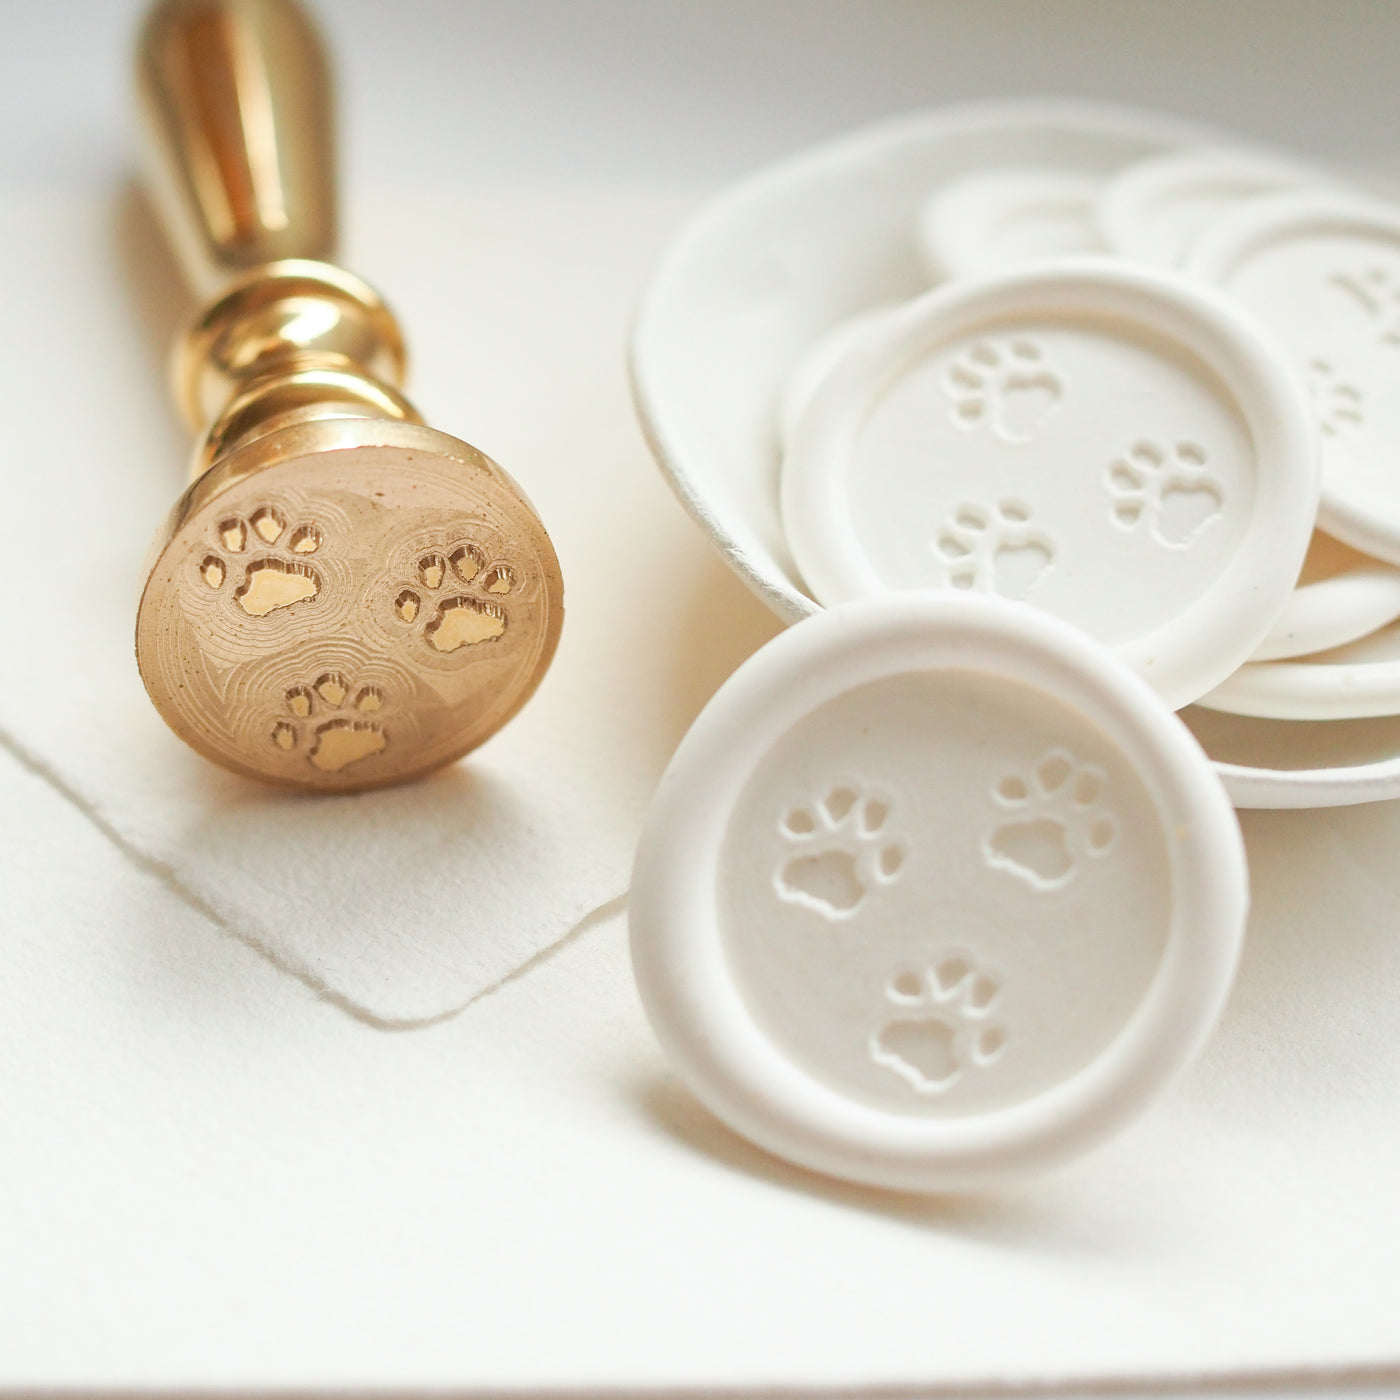 PAW PRINTS IN SNOW WAX SEAL STAMP - 'BELIEVE' CHRISTMAS COLLECTION